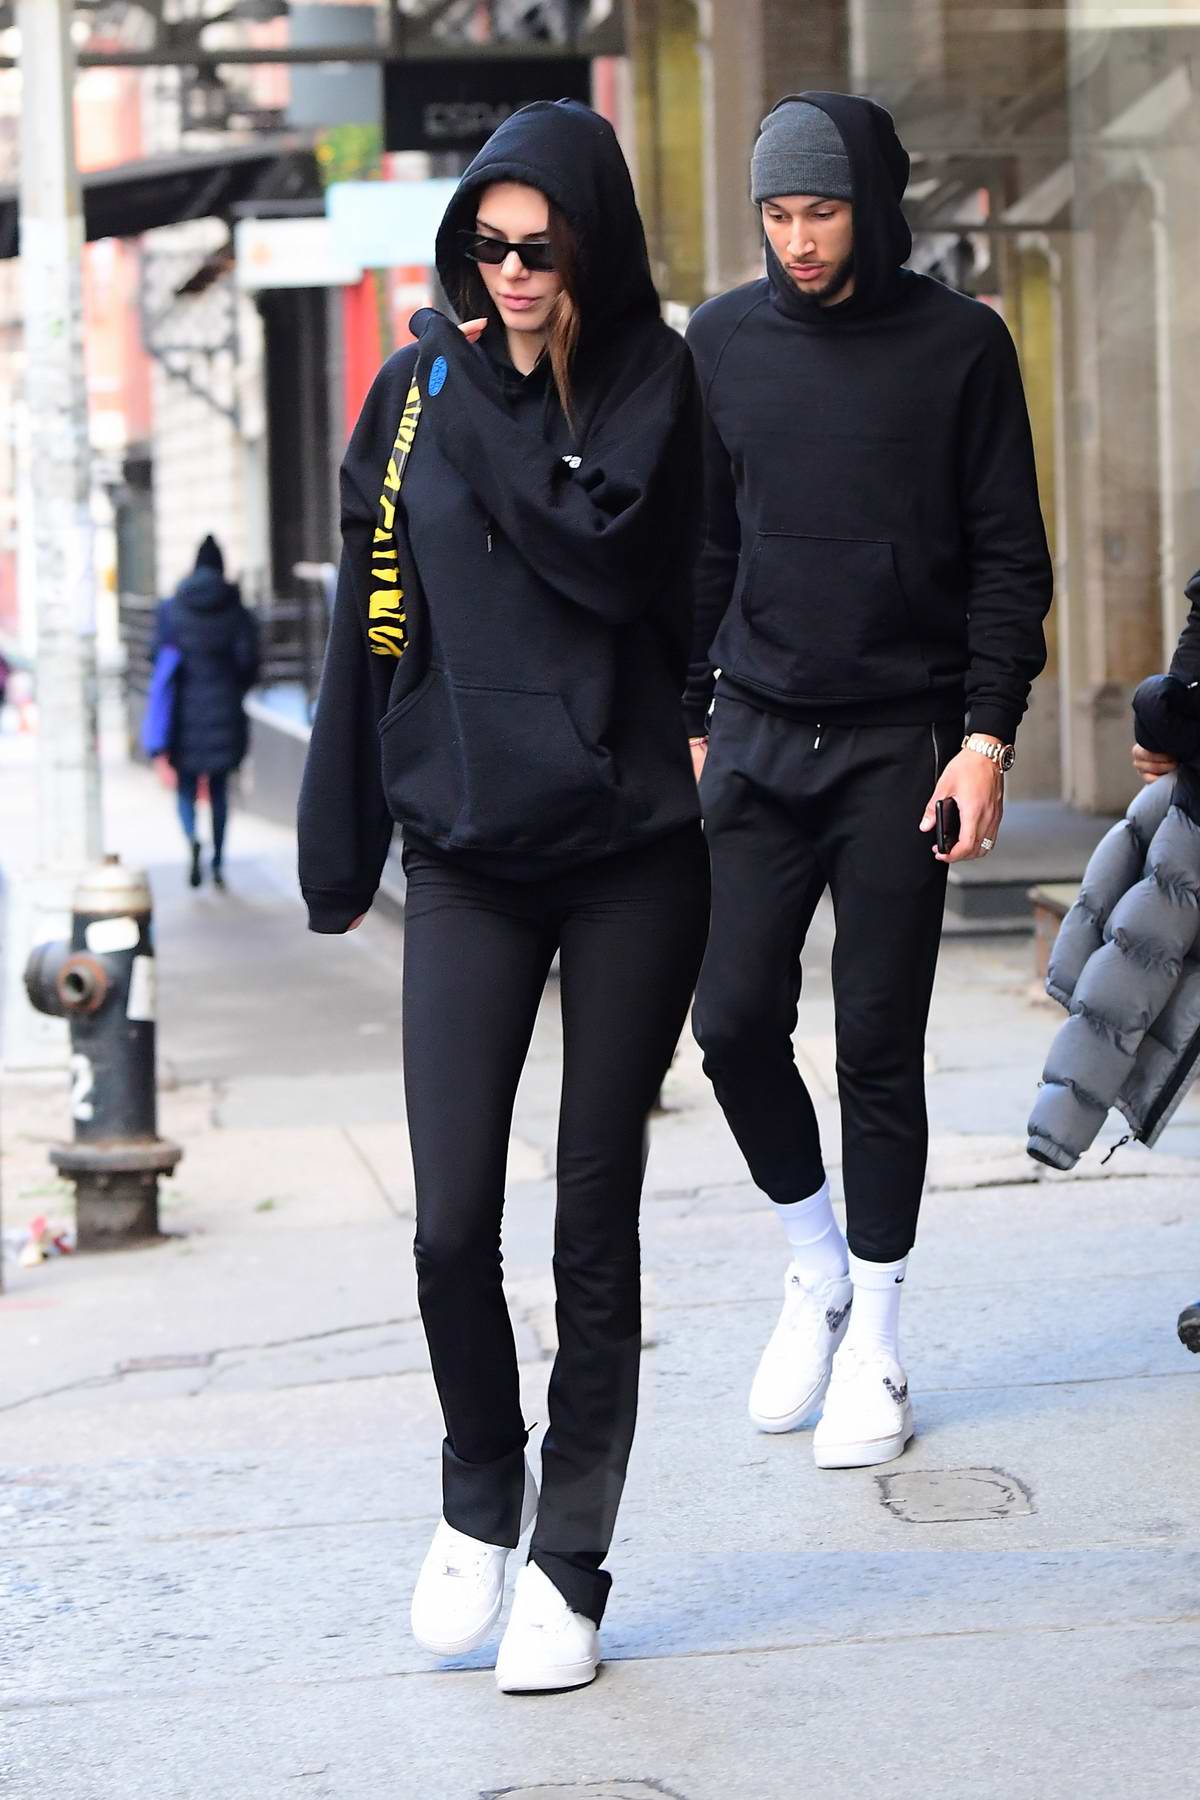 https://www.celebsfirst.com/wp-content/uploads/2020/01/kendall-jenner-rocks-a-black-hoodie-and-leggings-as-she-grabs-lunch-with-ben-simmons-at-bubbys-in-new-york-city-190120_1.jpg